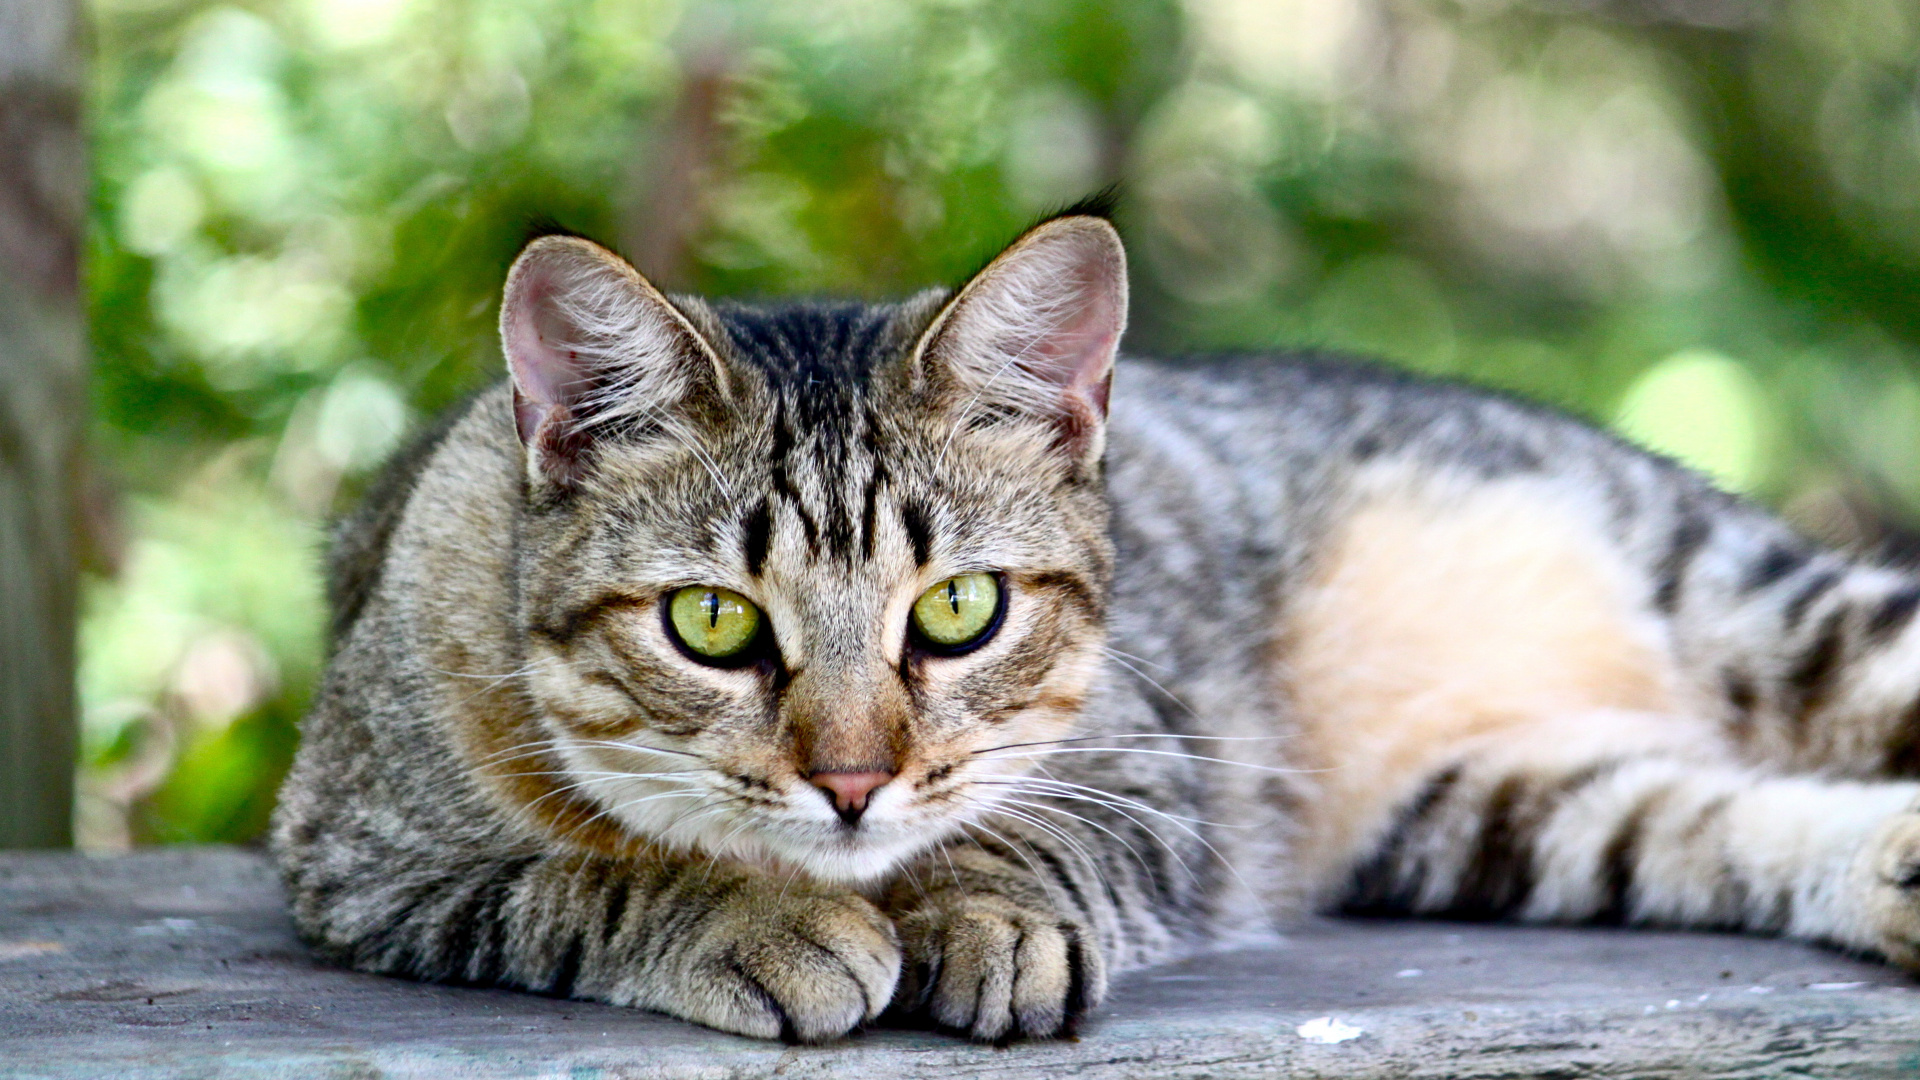 Brown Tabby Cat Lying on Wooden Surface. Wallpaper in 1920x1080 Resolution